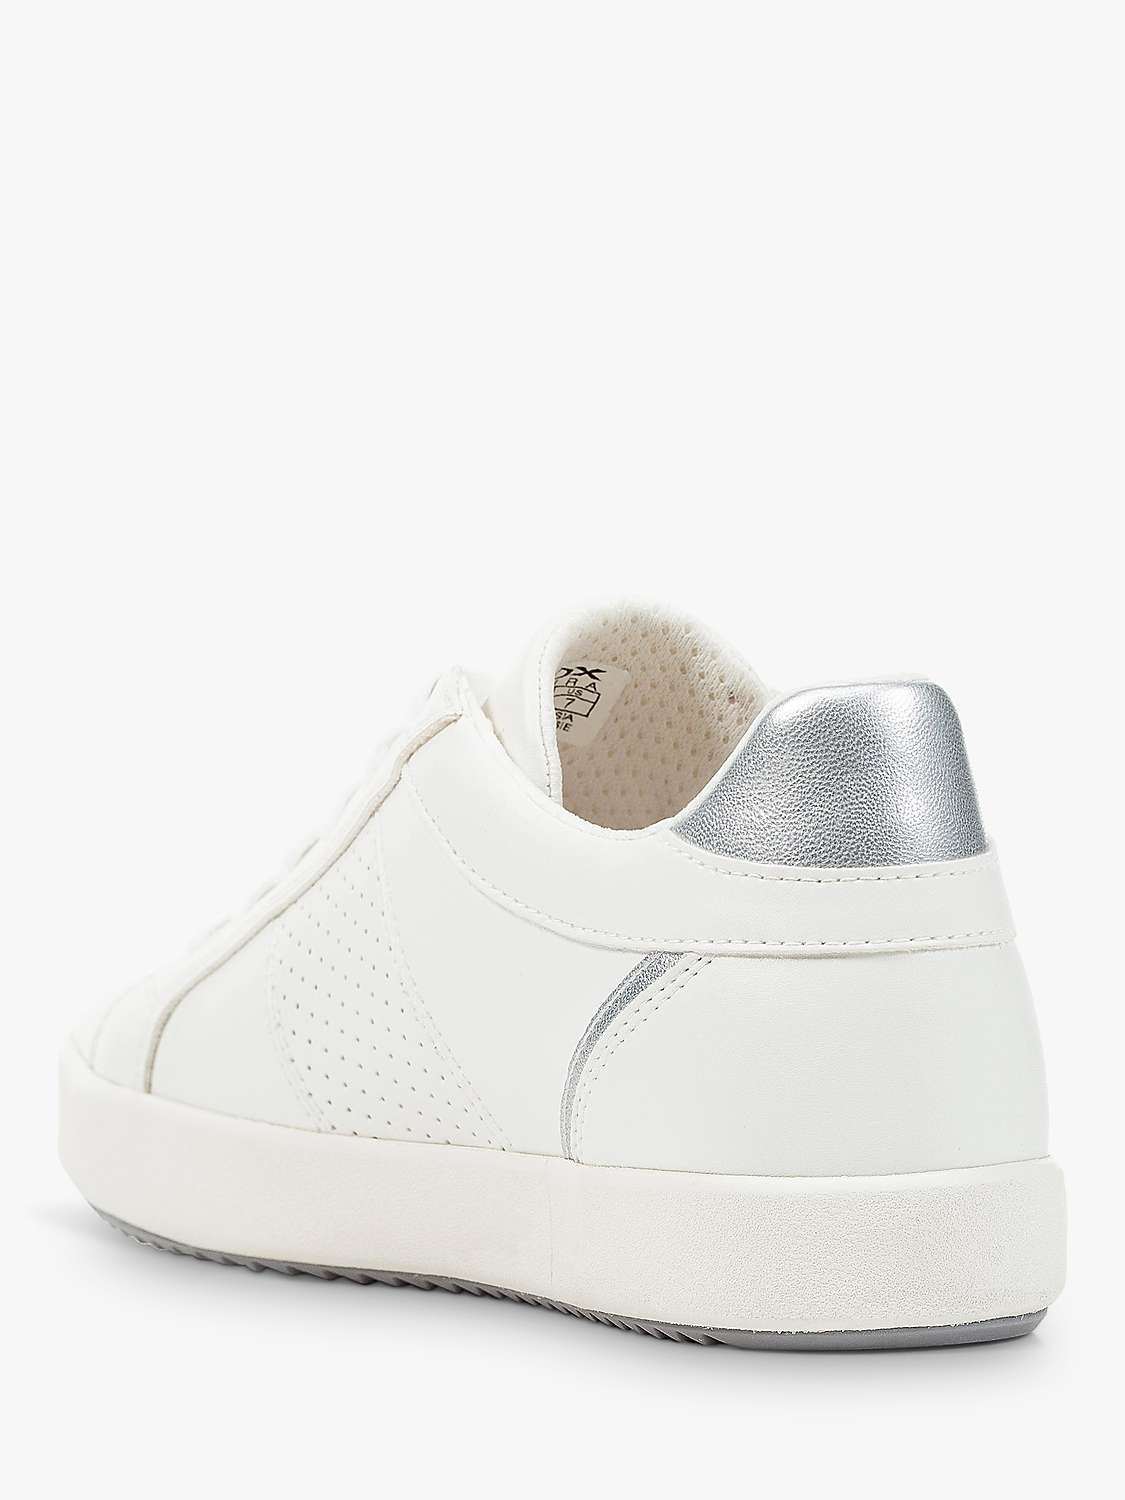 Buy Geox Blomiee Lightweight Zip Detail Trainers, White/Silver Online at johnlewis.com